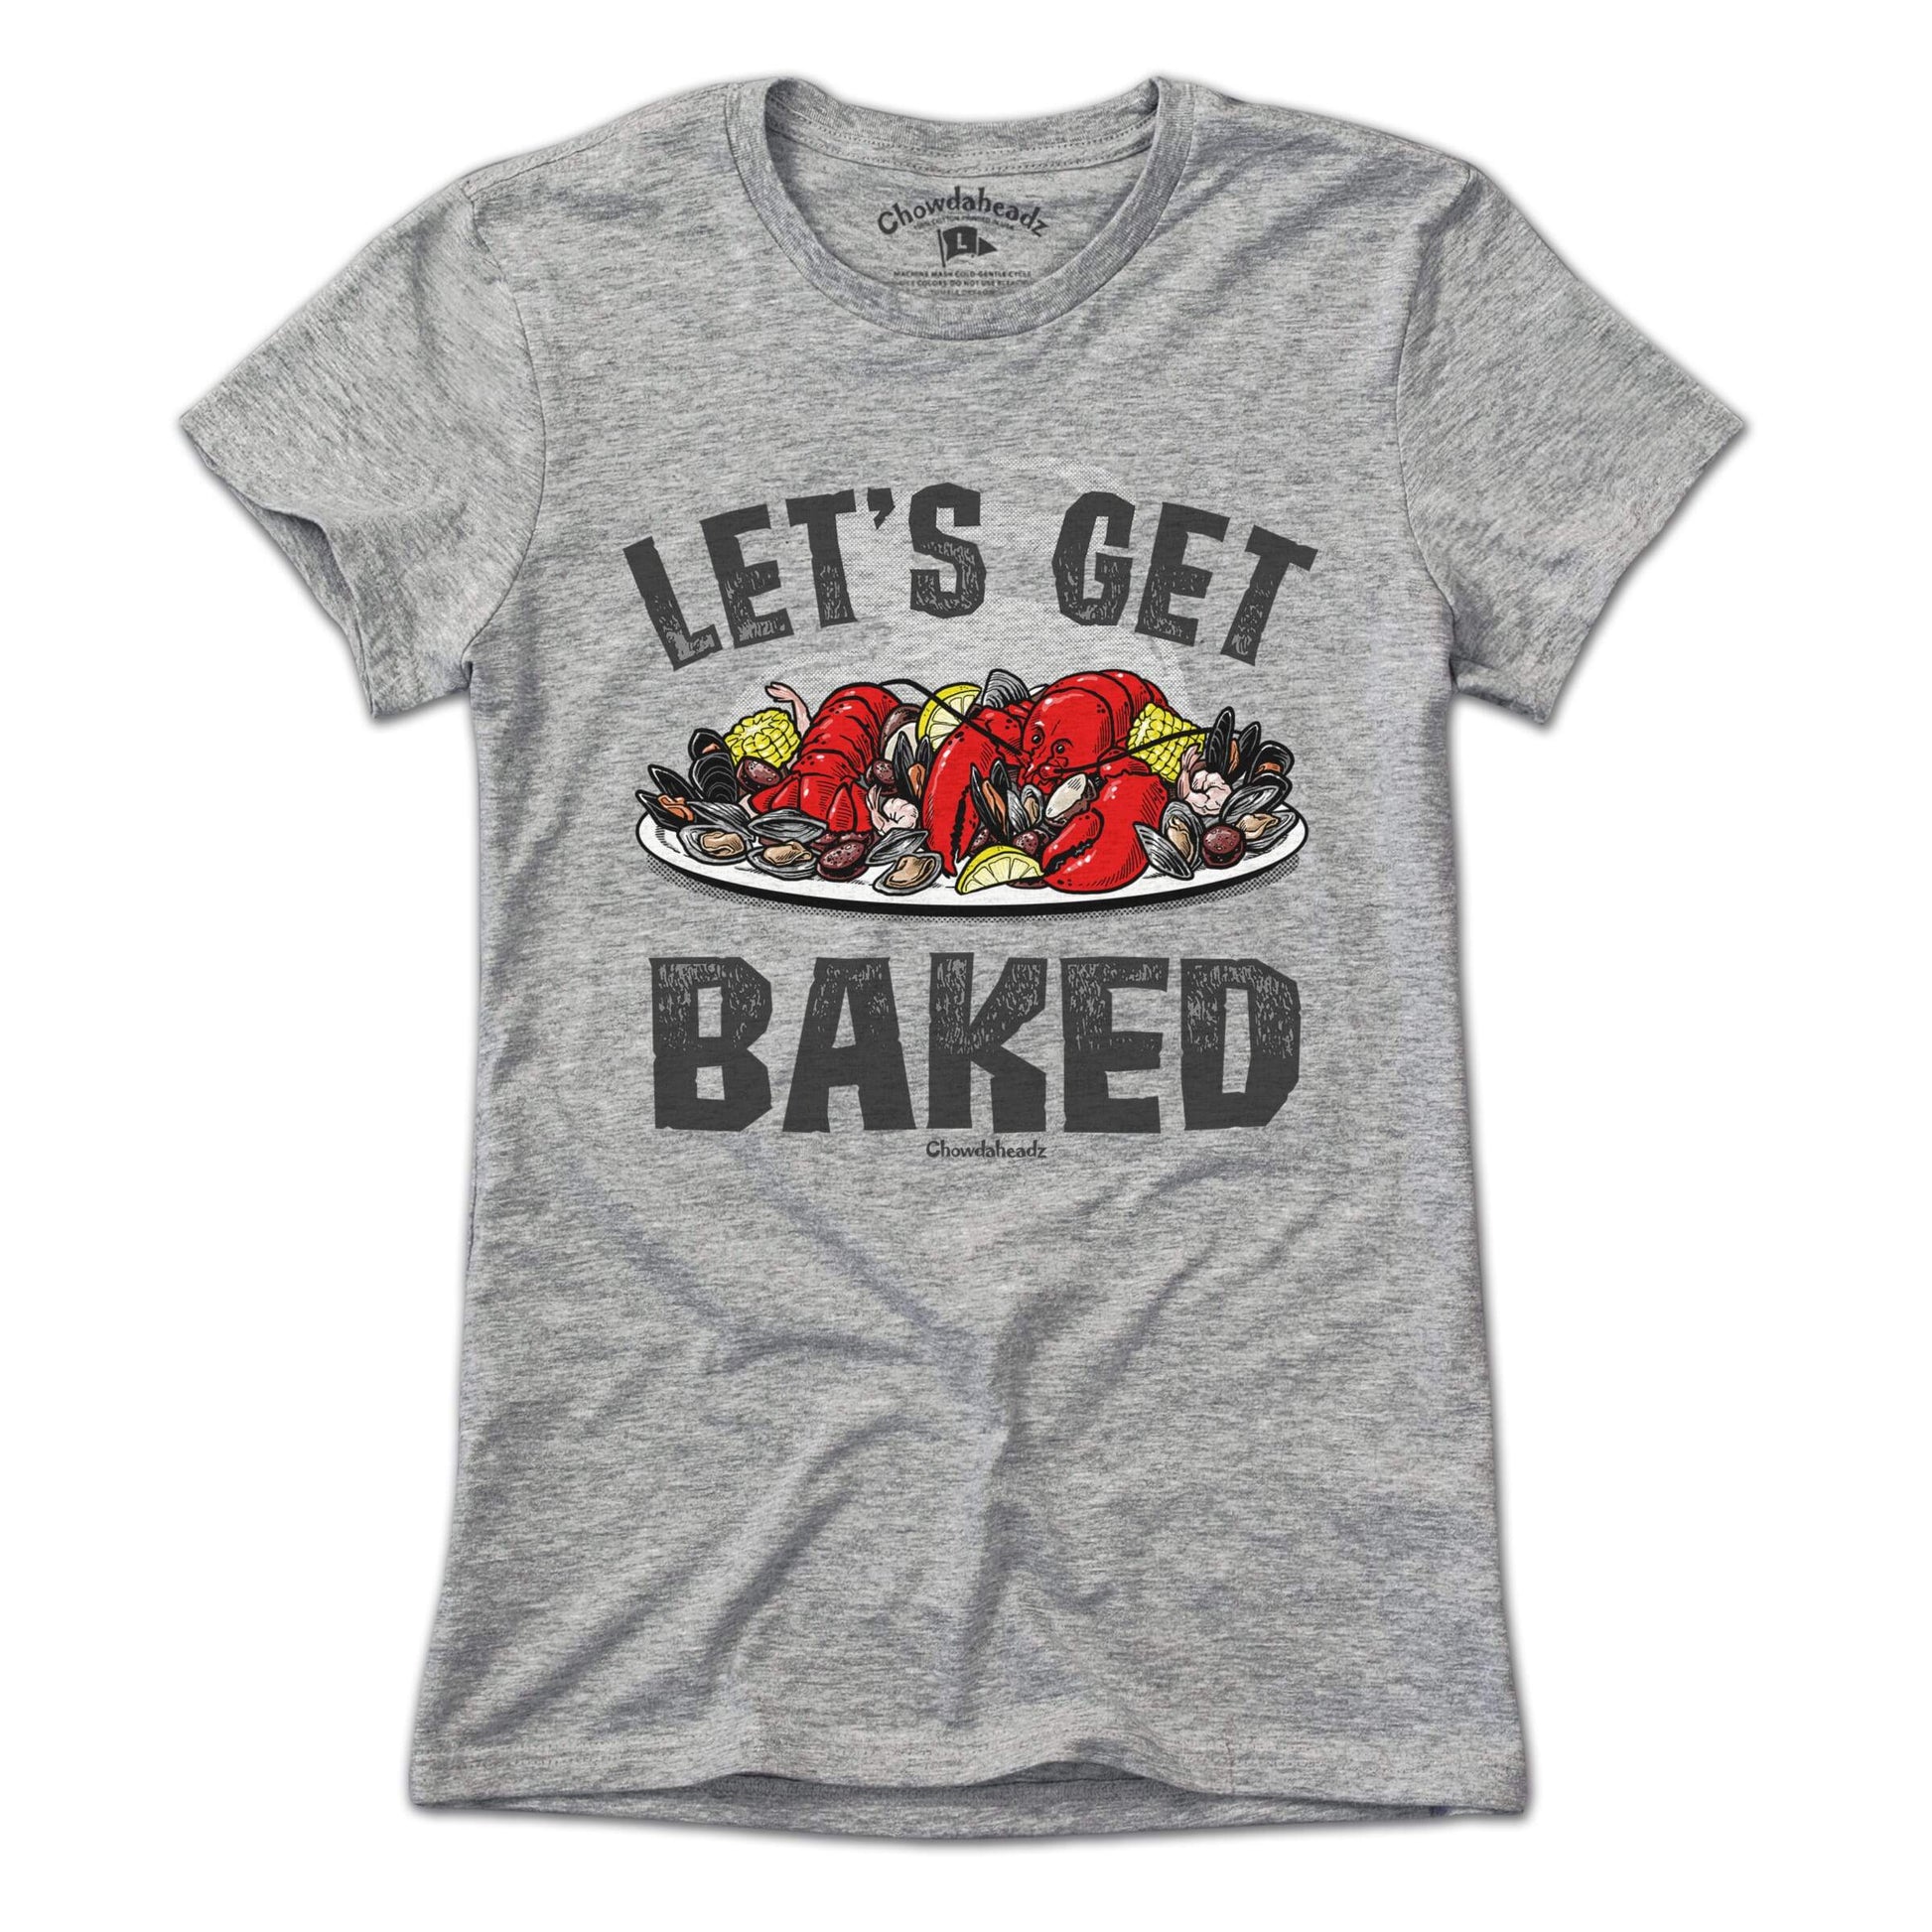 Let's Get Baked T-Shirt - Chowdaheadz